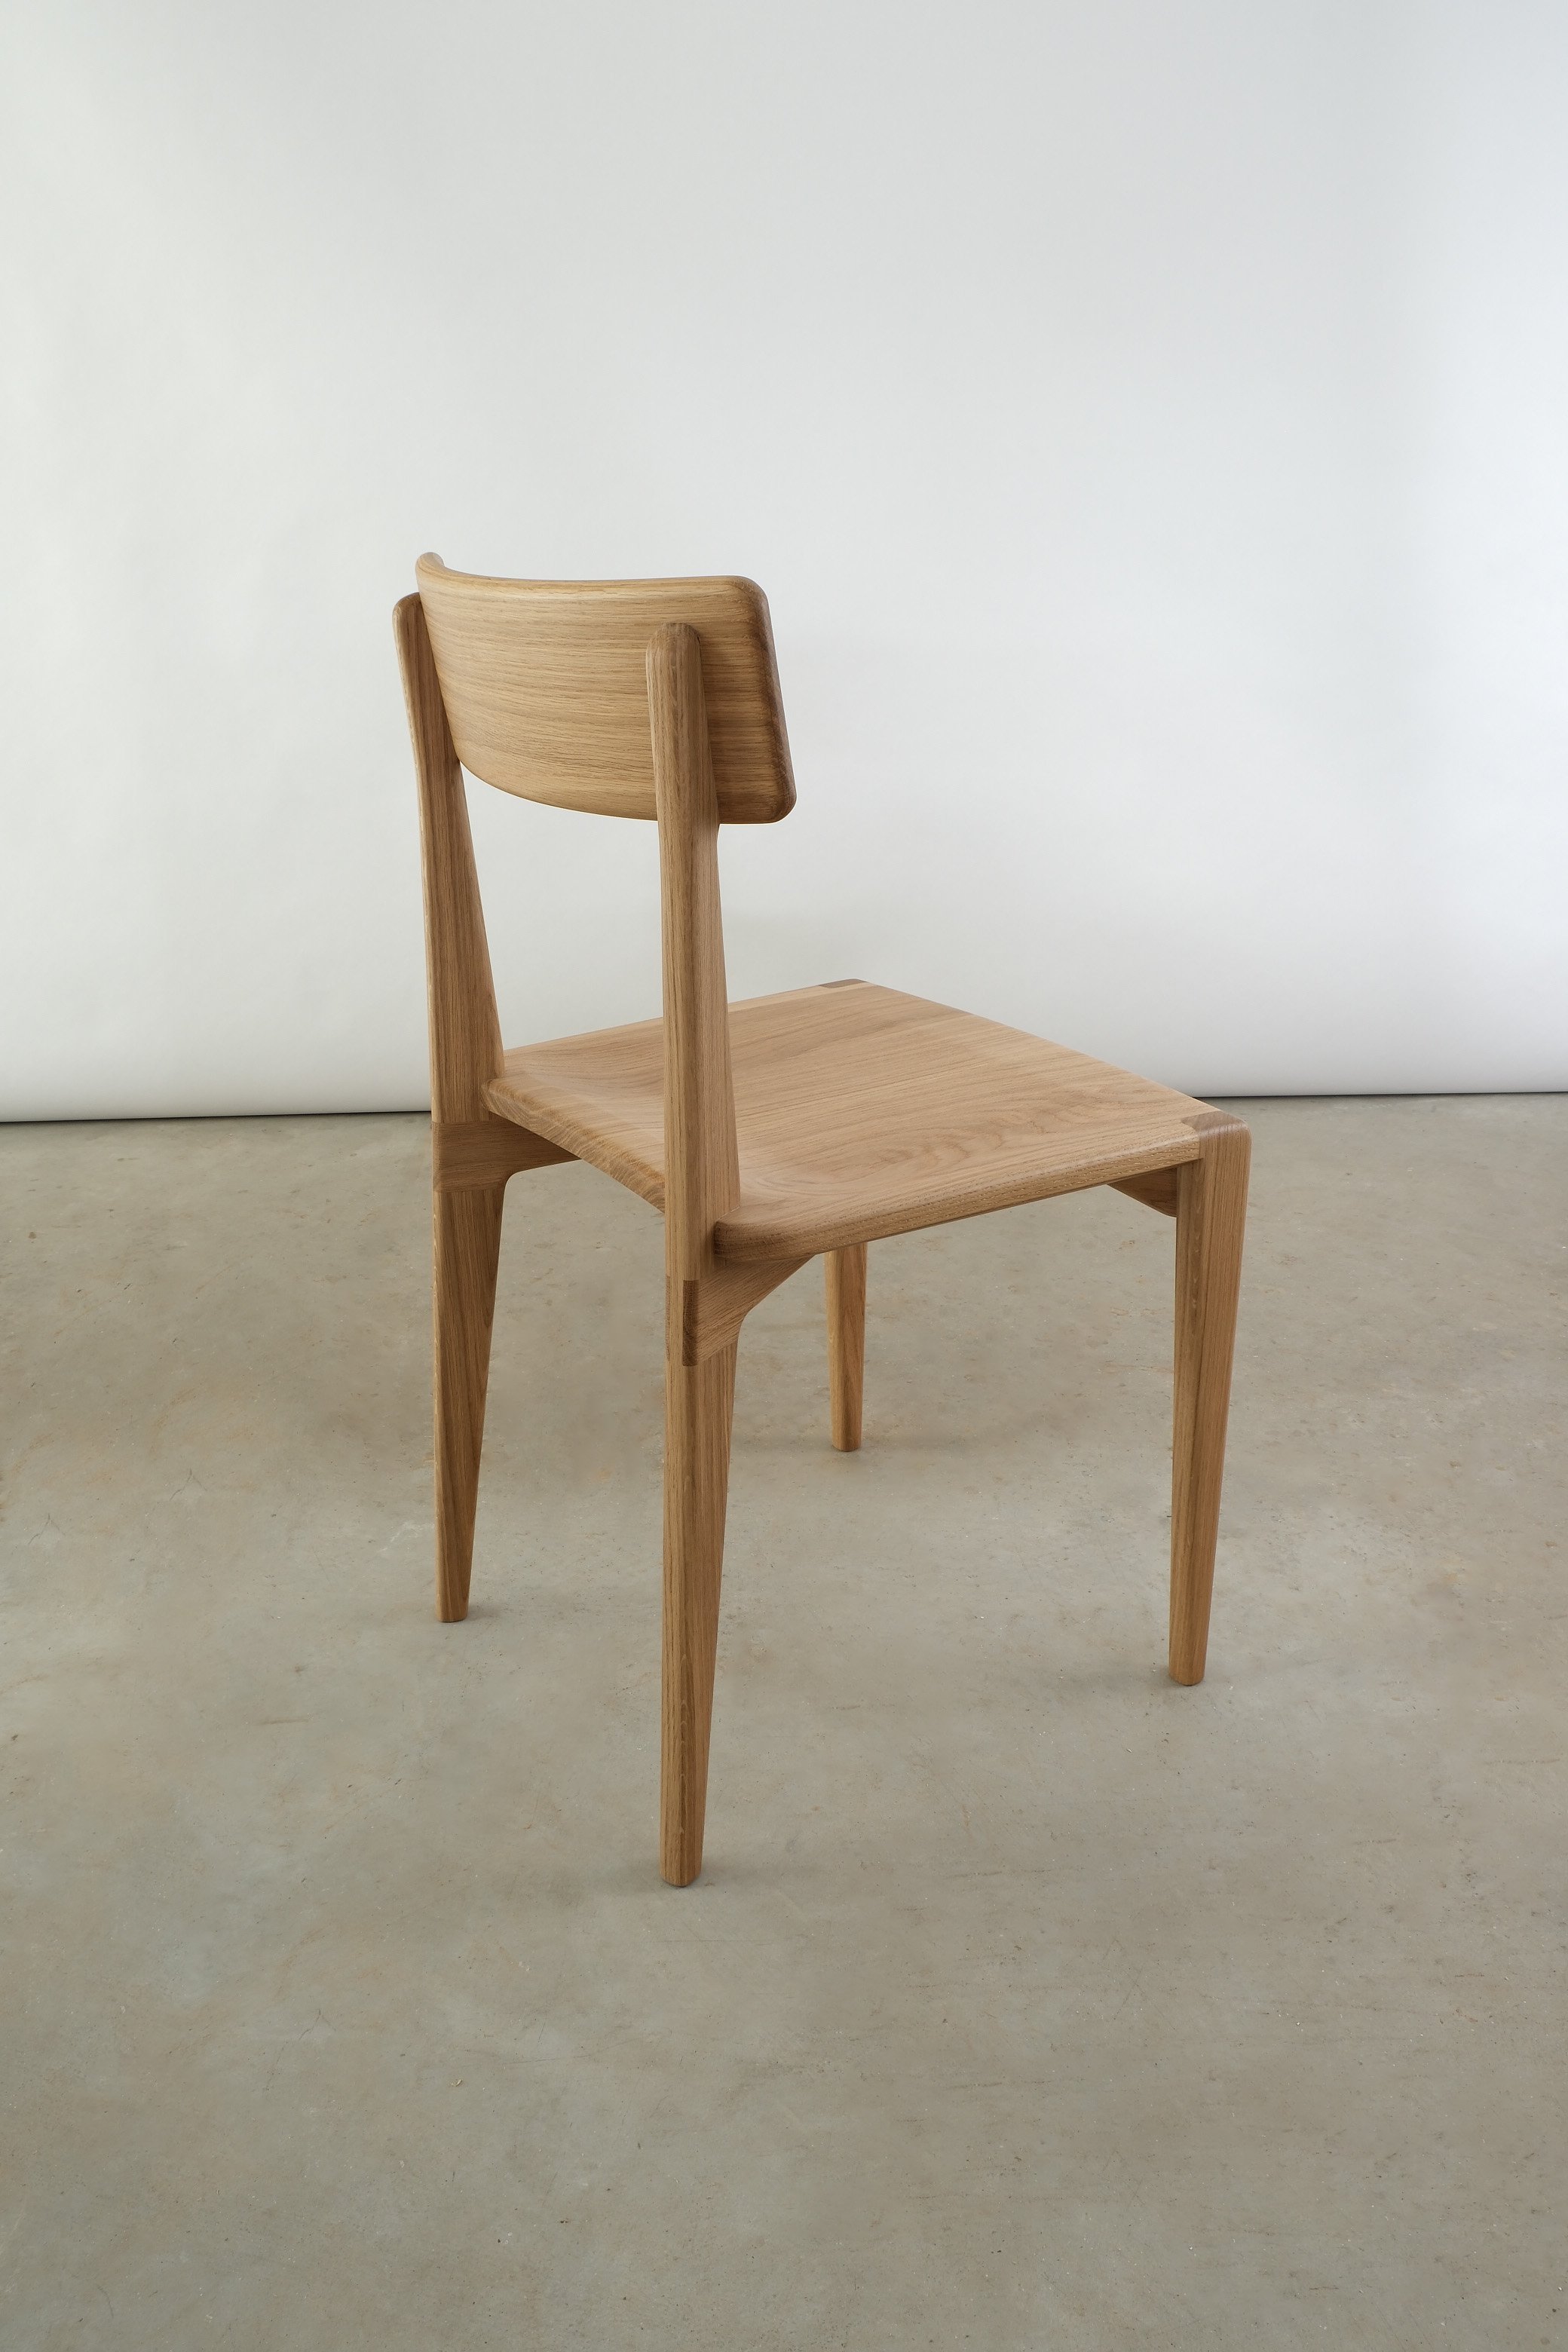 durham chair in oak with white background 3:4 back view.JPG